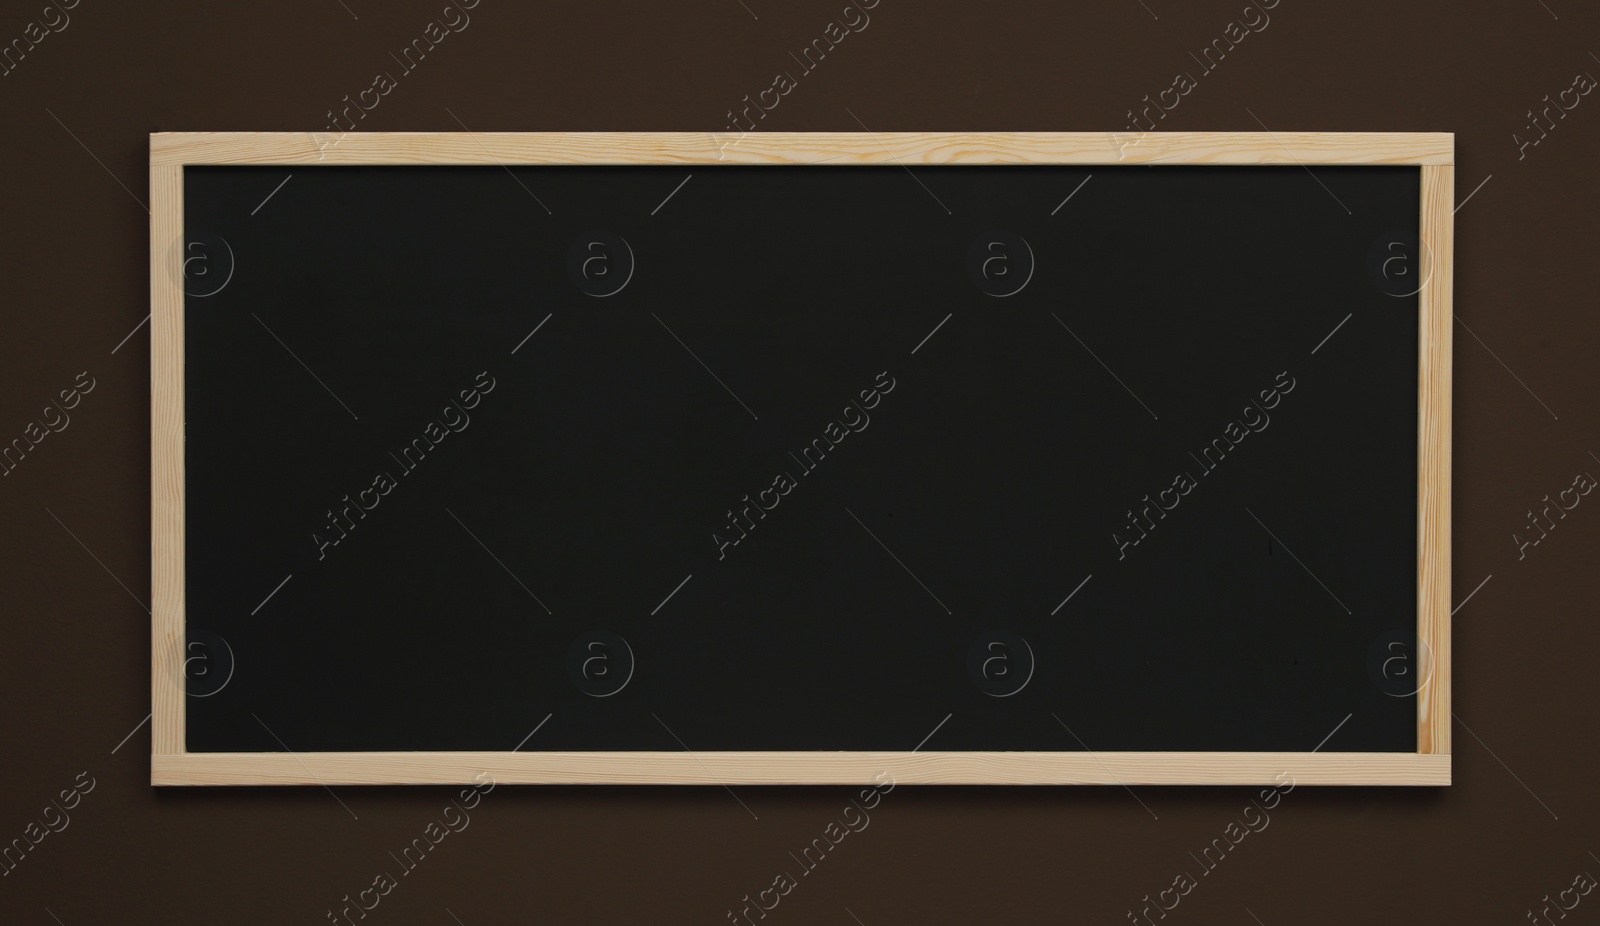 Photo of Clean black chalkboard hanging on brown wall